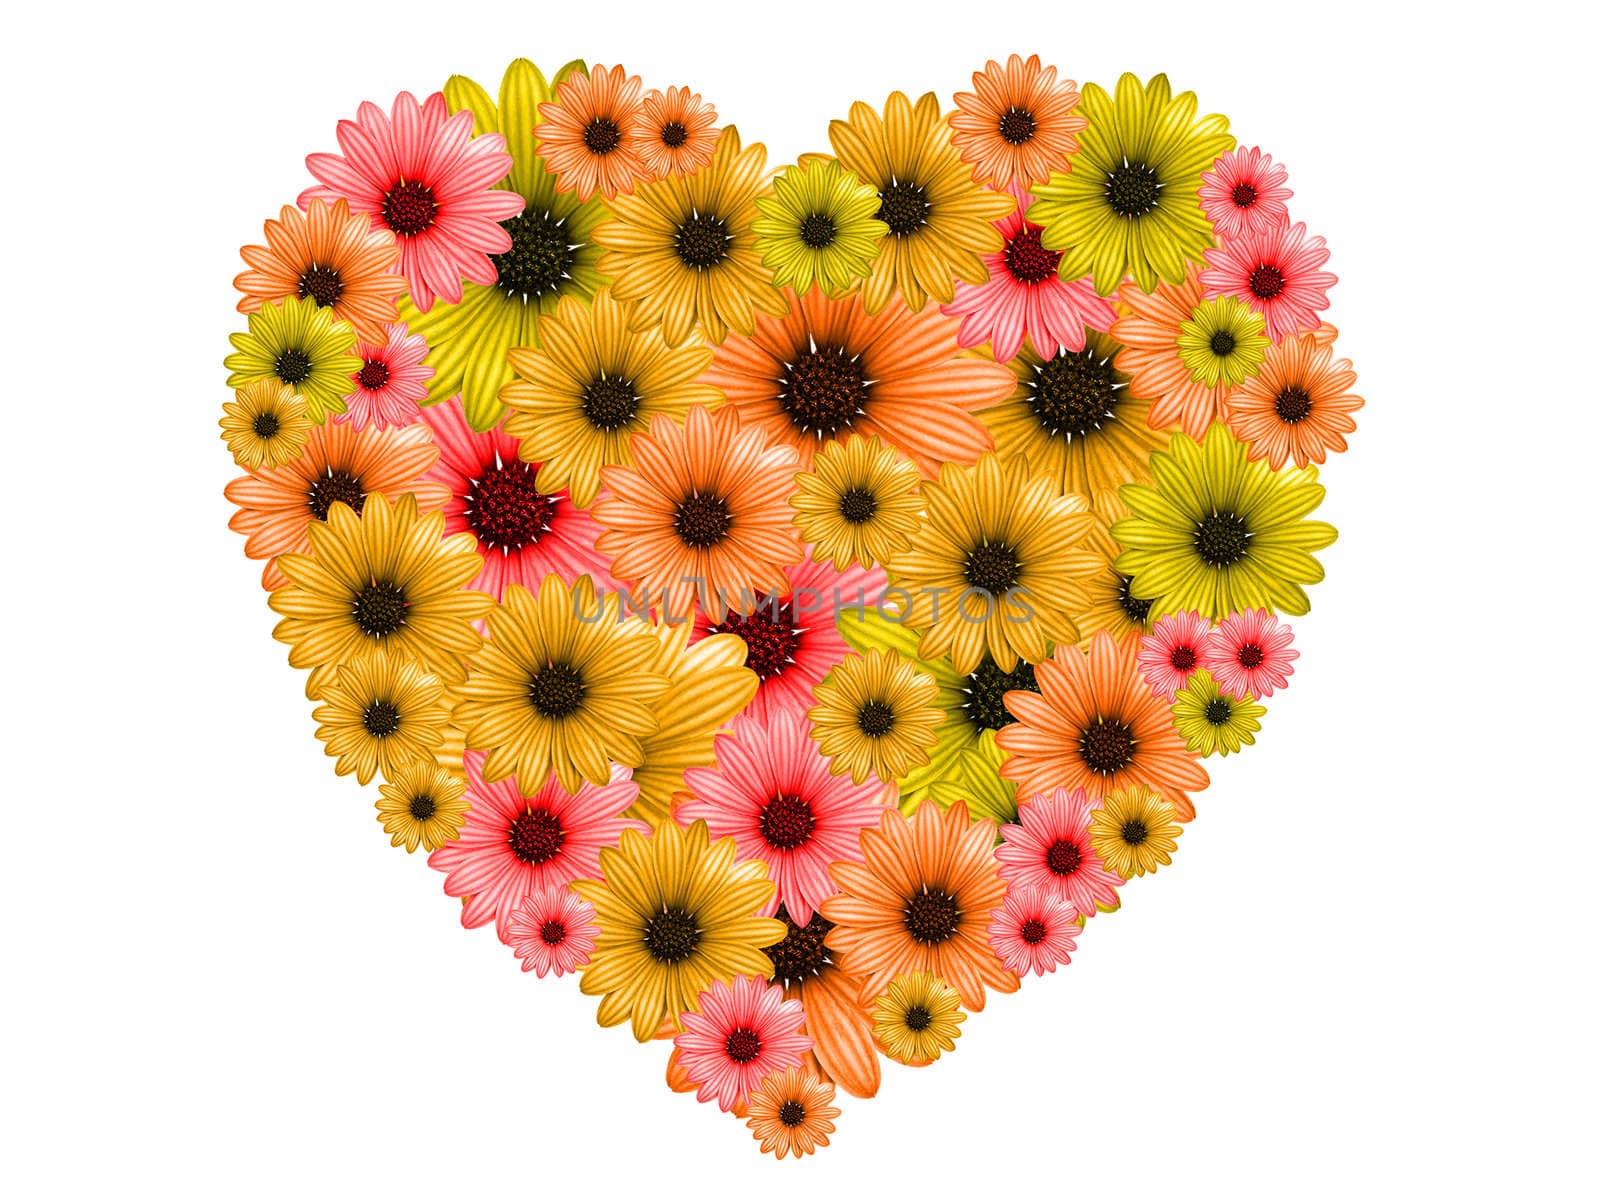 Heart made of colorful flowers